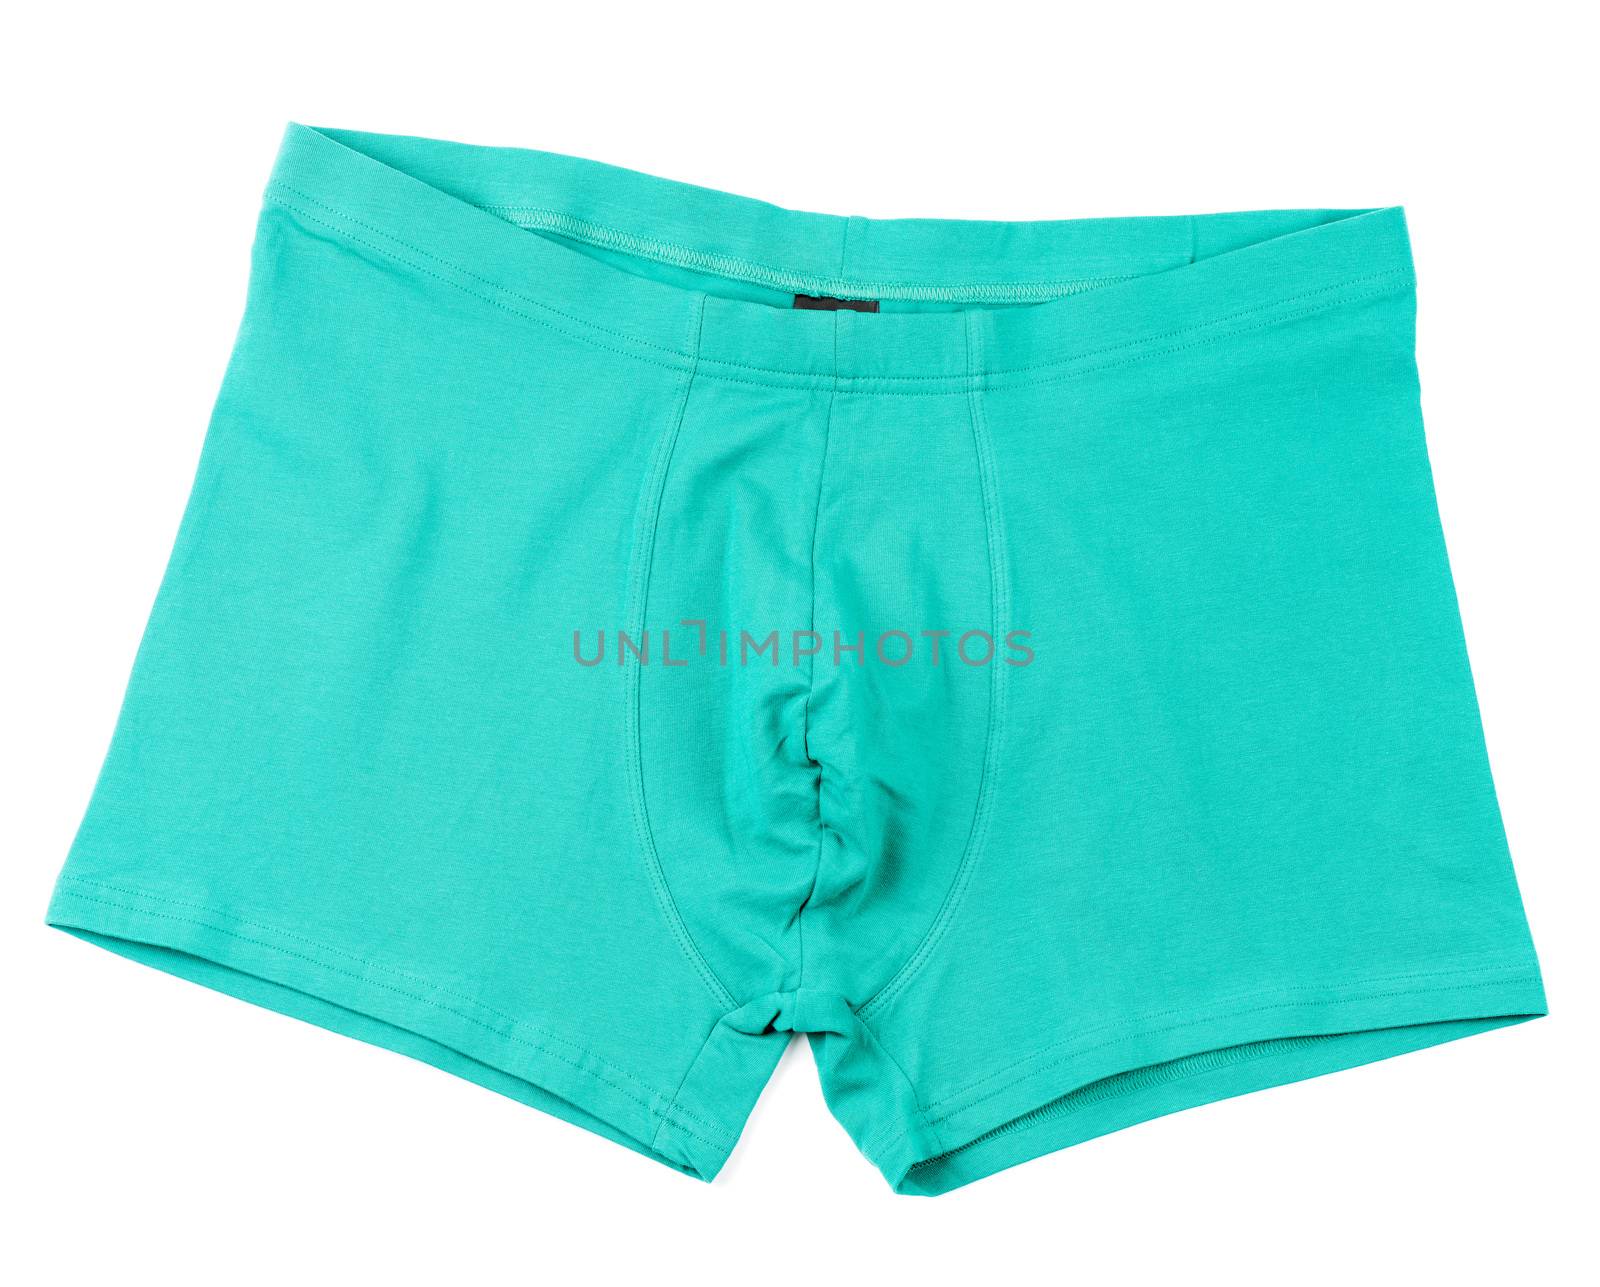 Green men's Boxer briefs isolated on a white background